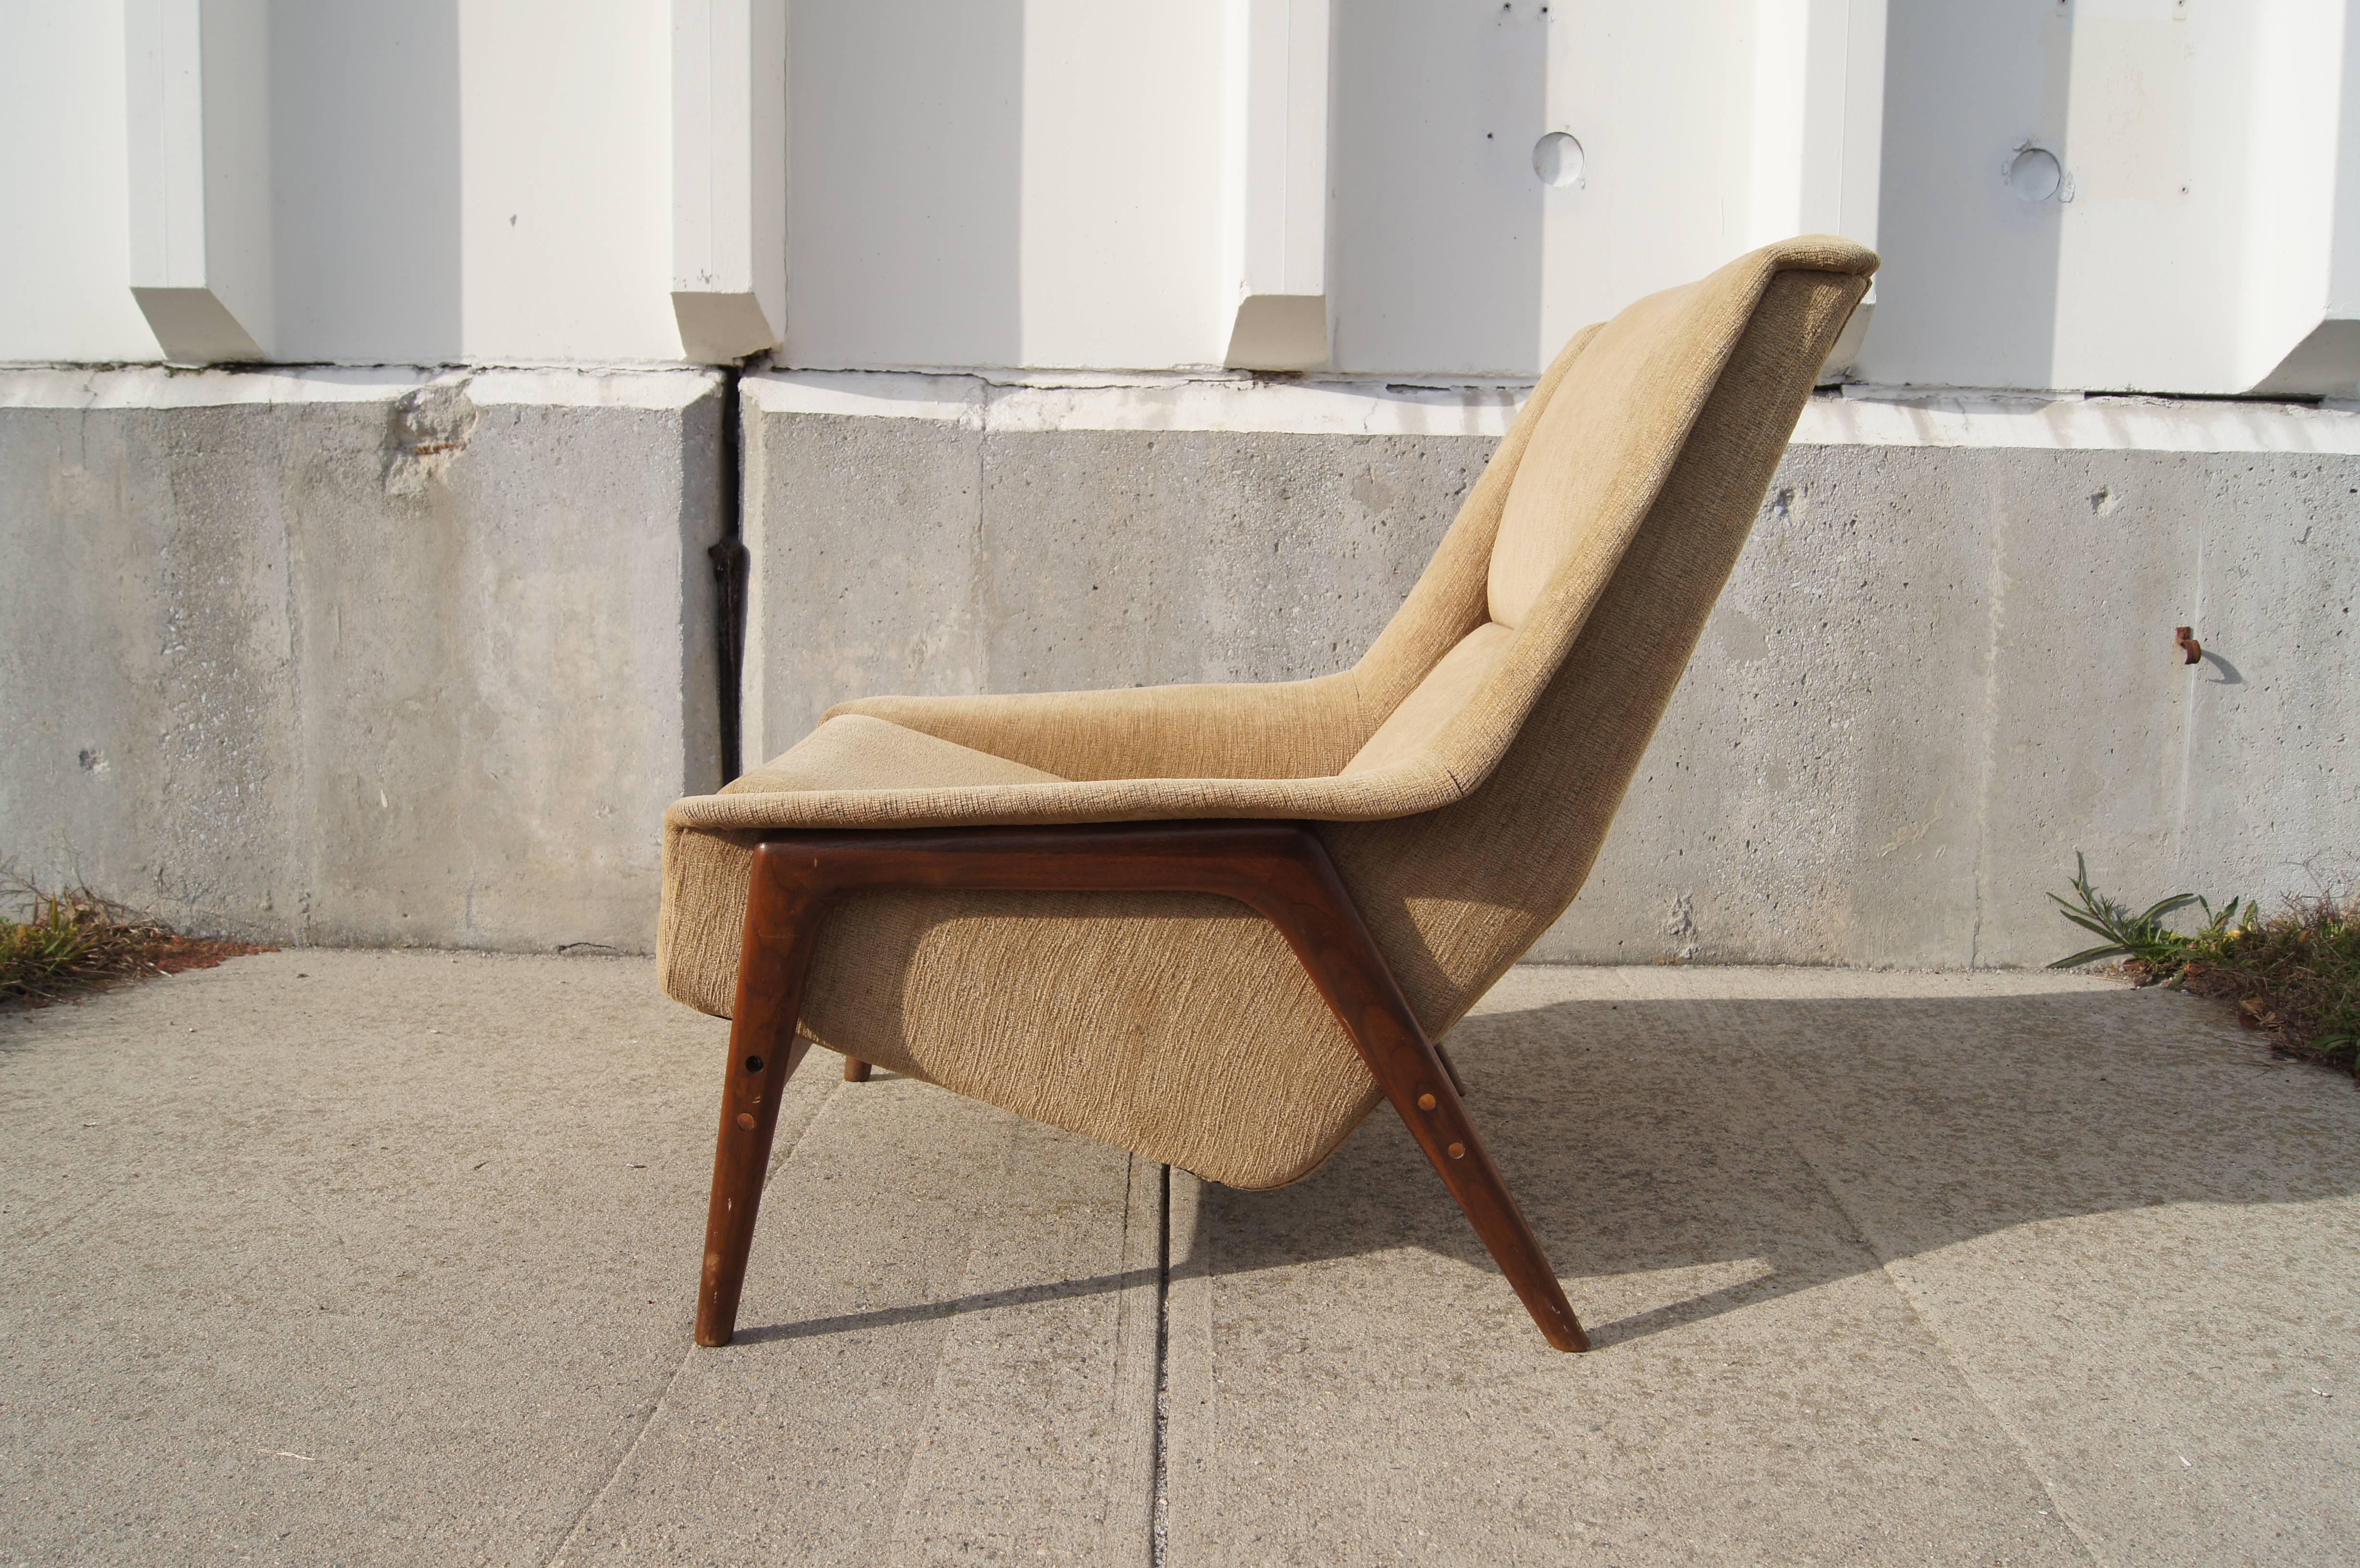 Designed by Folke Ohlsson for the Swedish manufacturer Dux, this lounge chair offers a supremely comfortable seat within an exposed teak frame. 

The chair was previously reupholstered.
